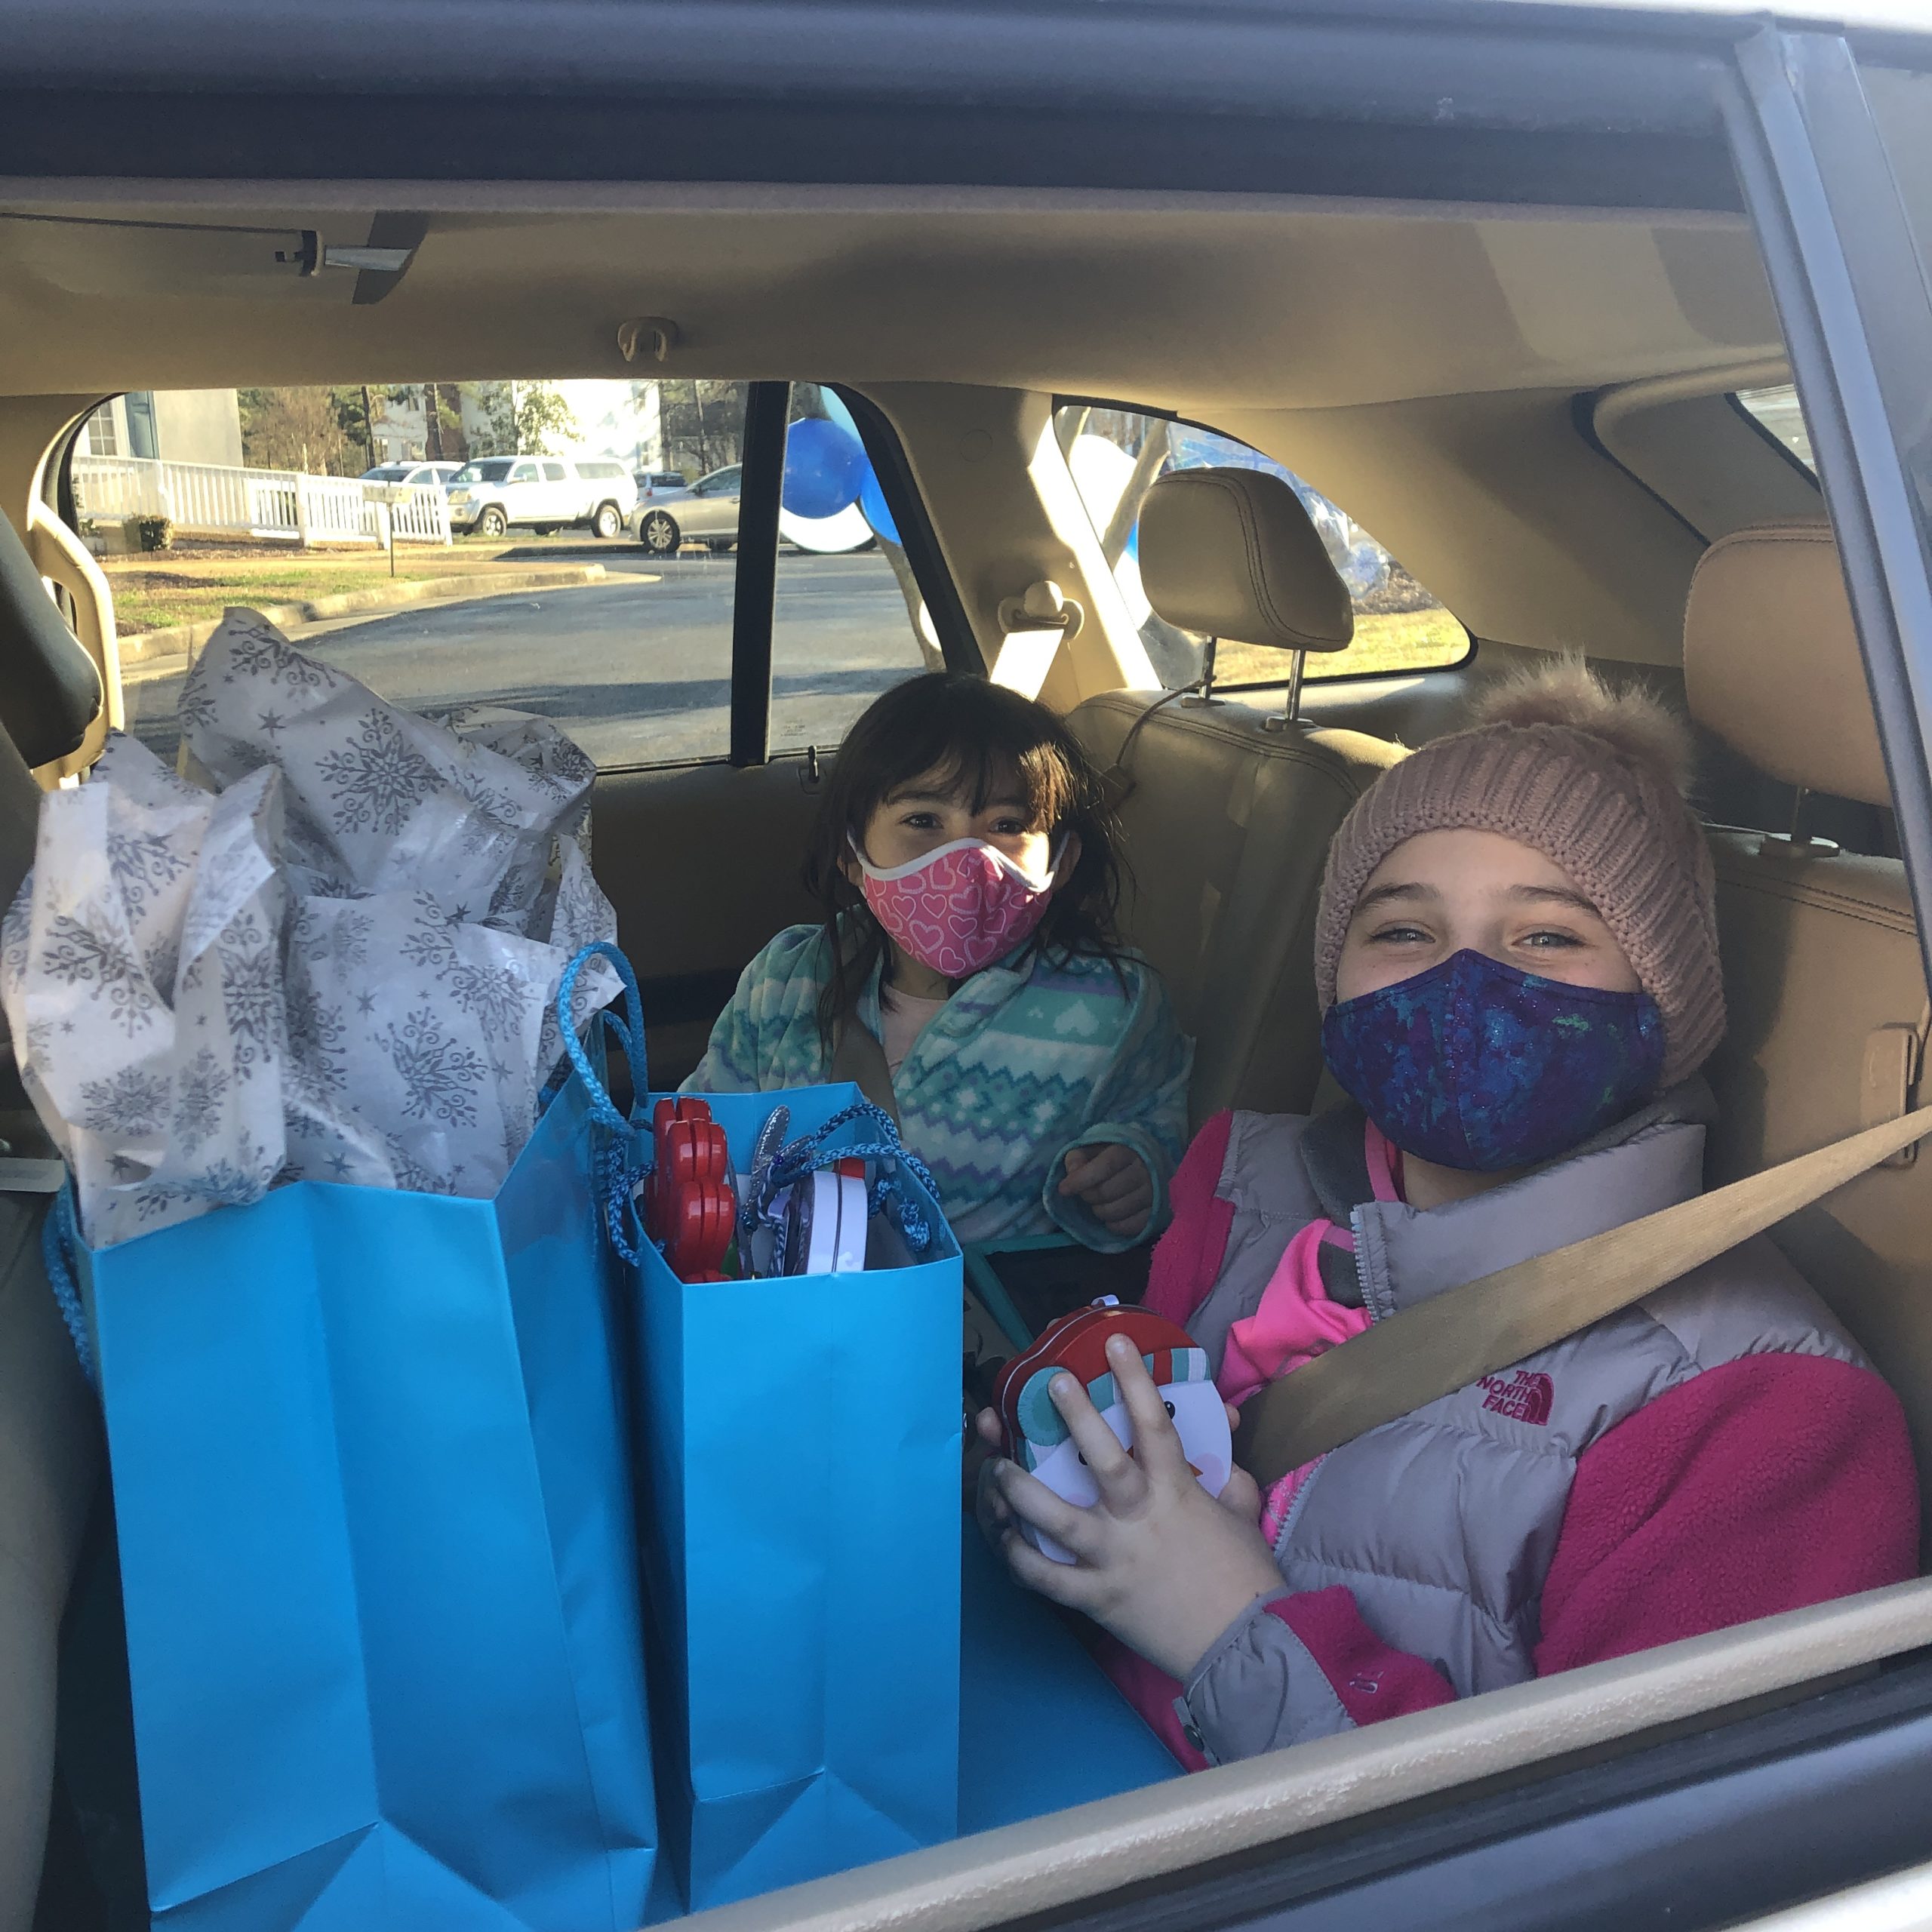 Two children sitting in a car with blue gift bags on their laps